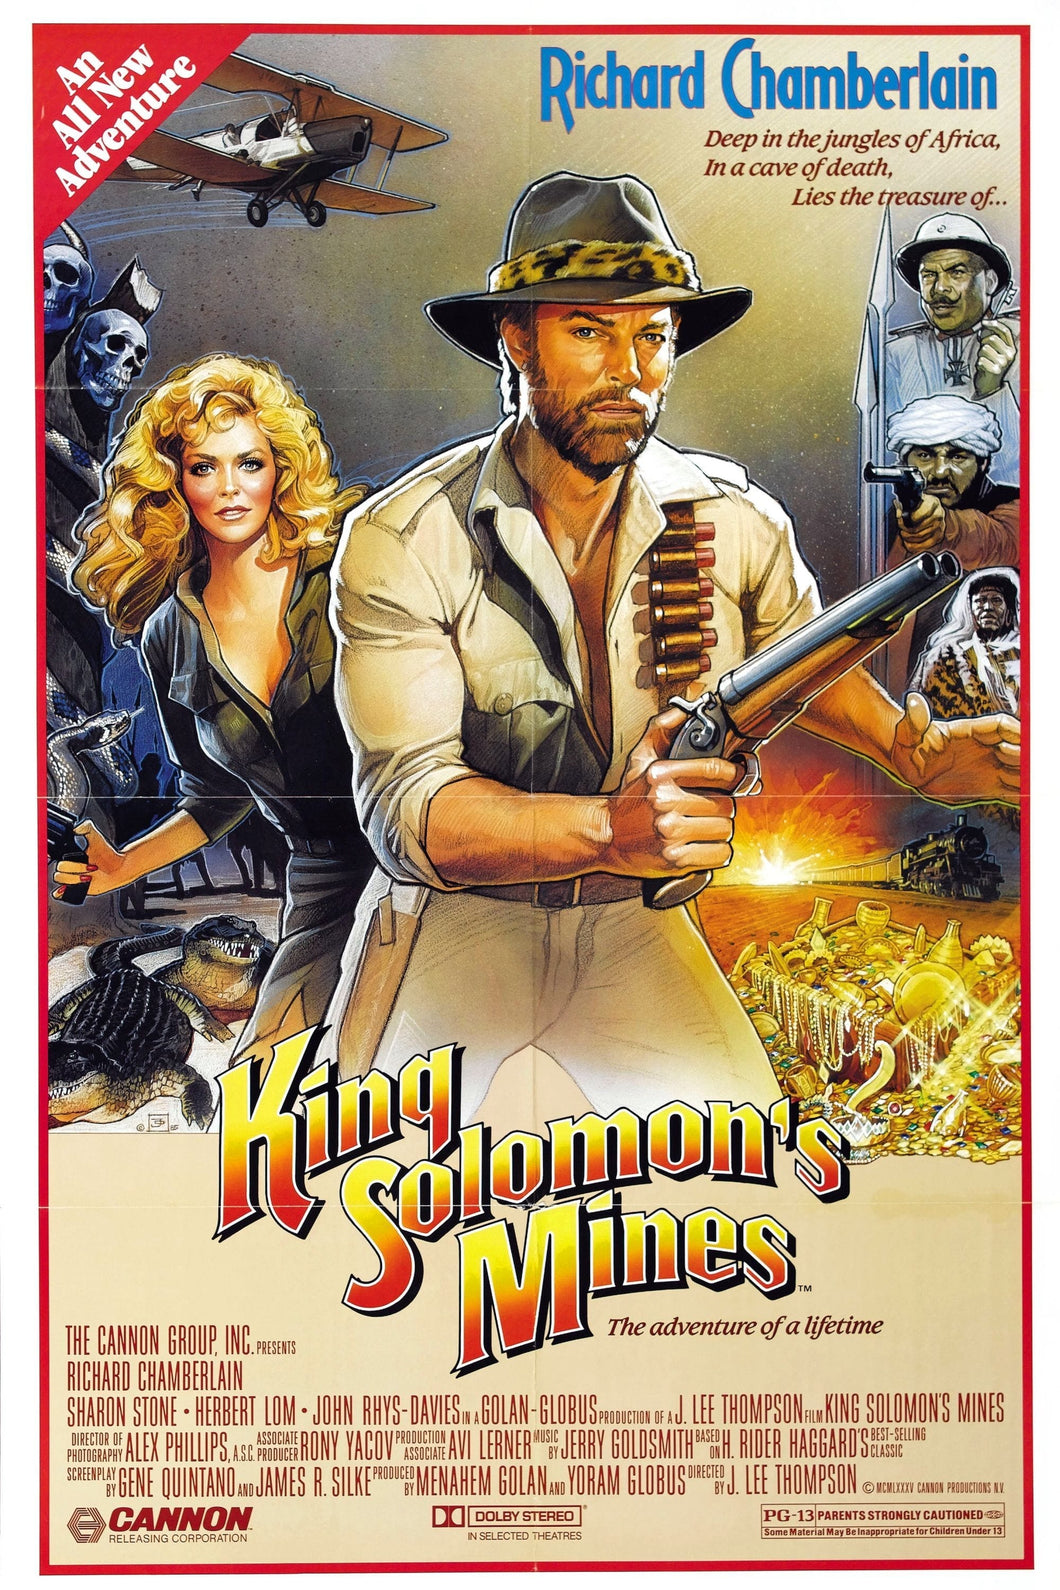 King Solomon's Mines (1985) Movie Poster High Quality Glossy Paper A1 A2 A3 A4 A3 Framed or Unframed!!